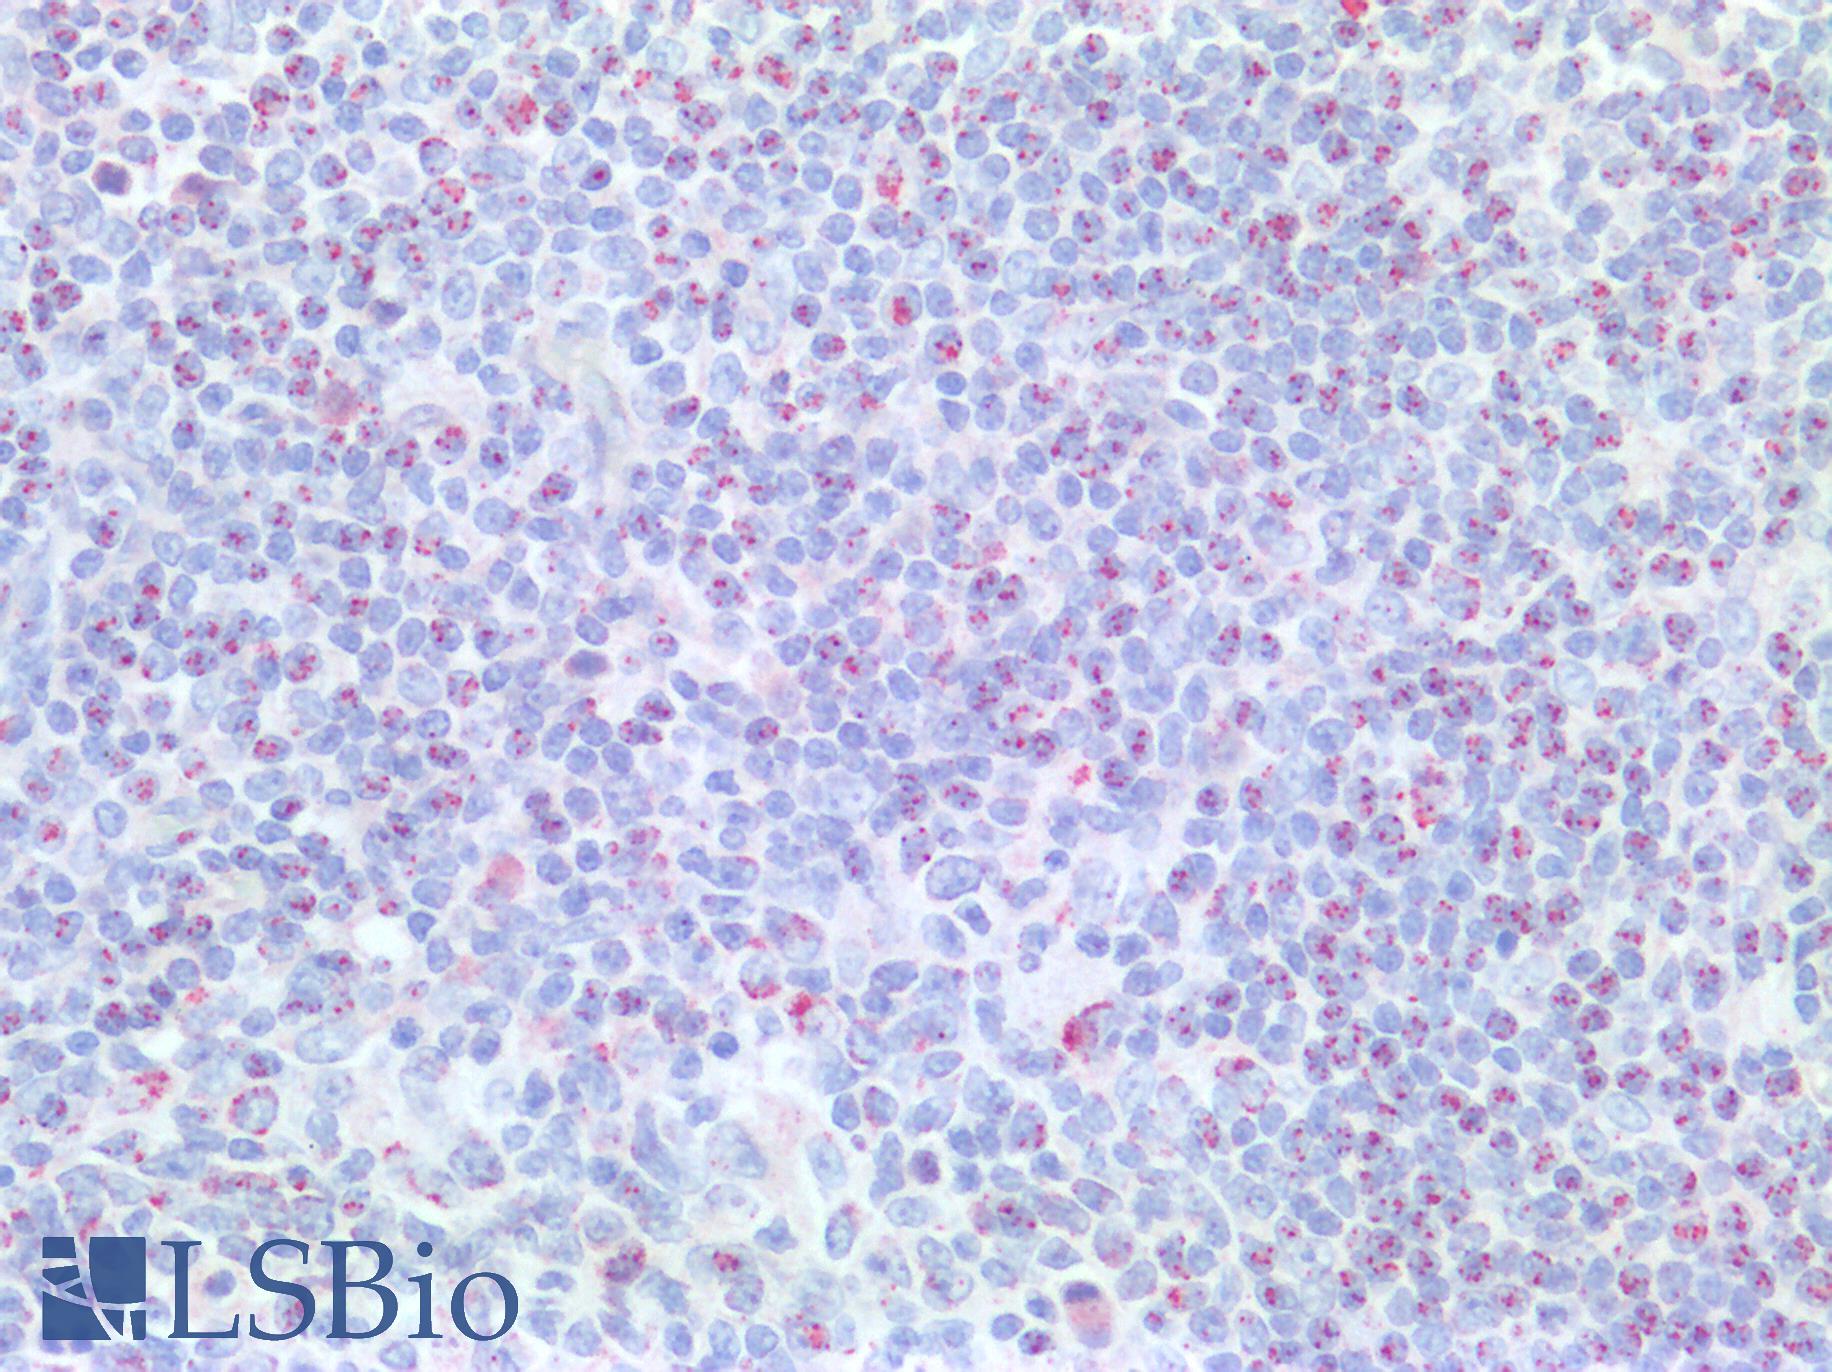 BCL2 / Bcl-2 Antibody - Human Tonsil: Formalin-Fixed, Paraffin-Embedded (FFPE)